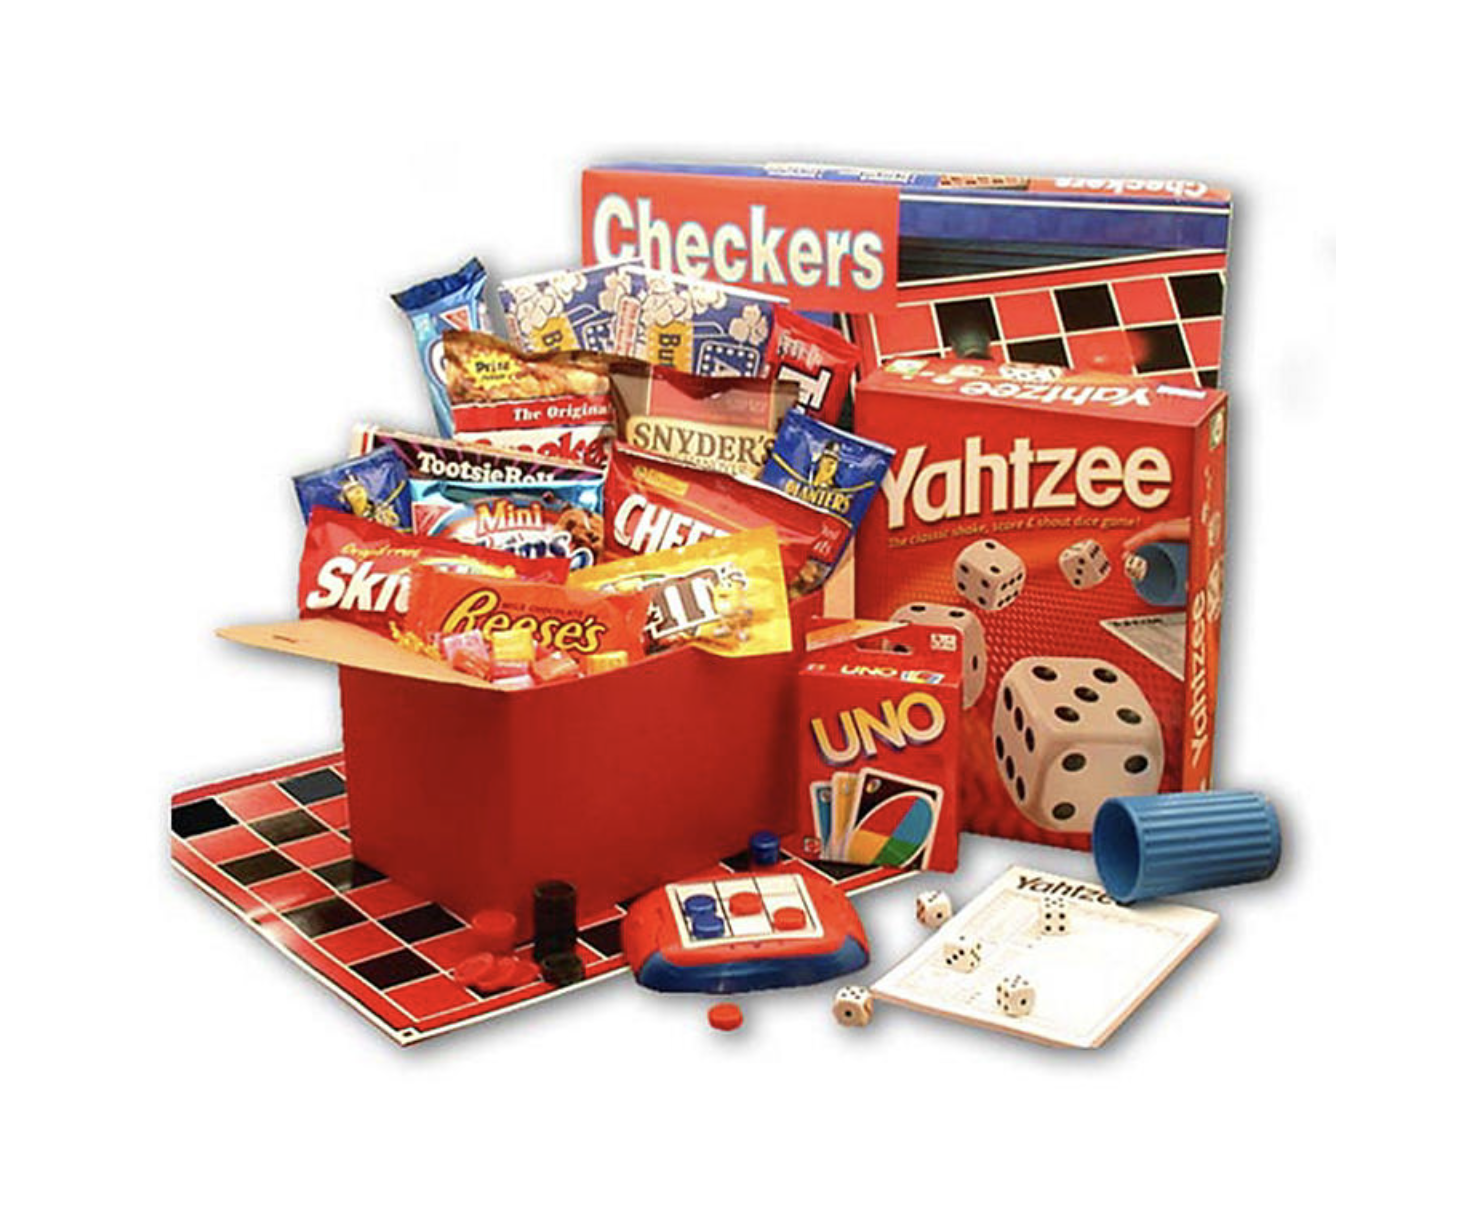 Checkers, Yahtzee, and Uno games with popcorn and snacks